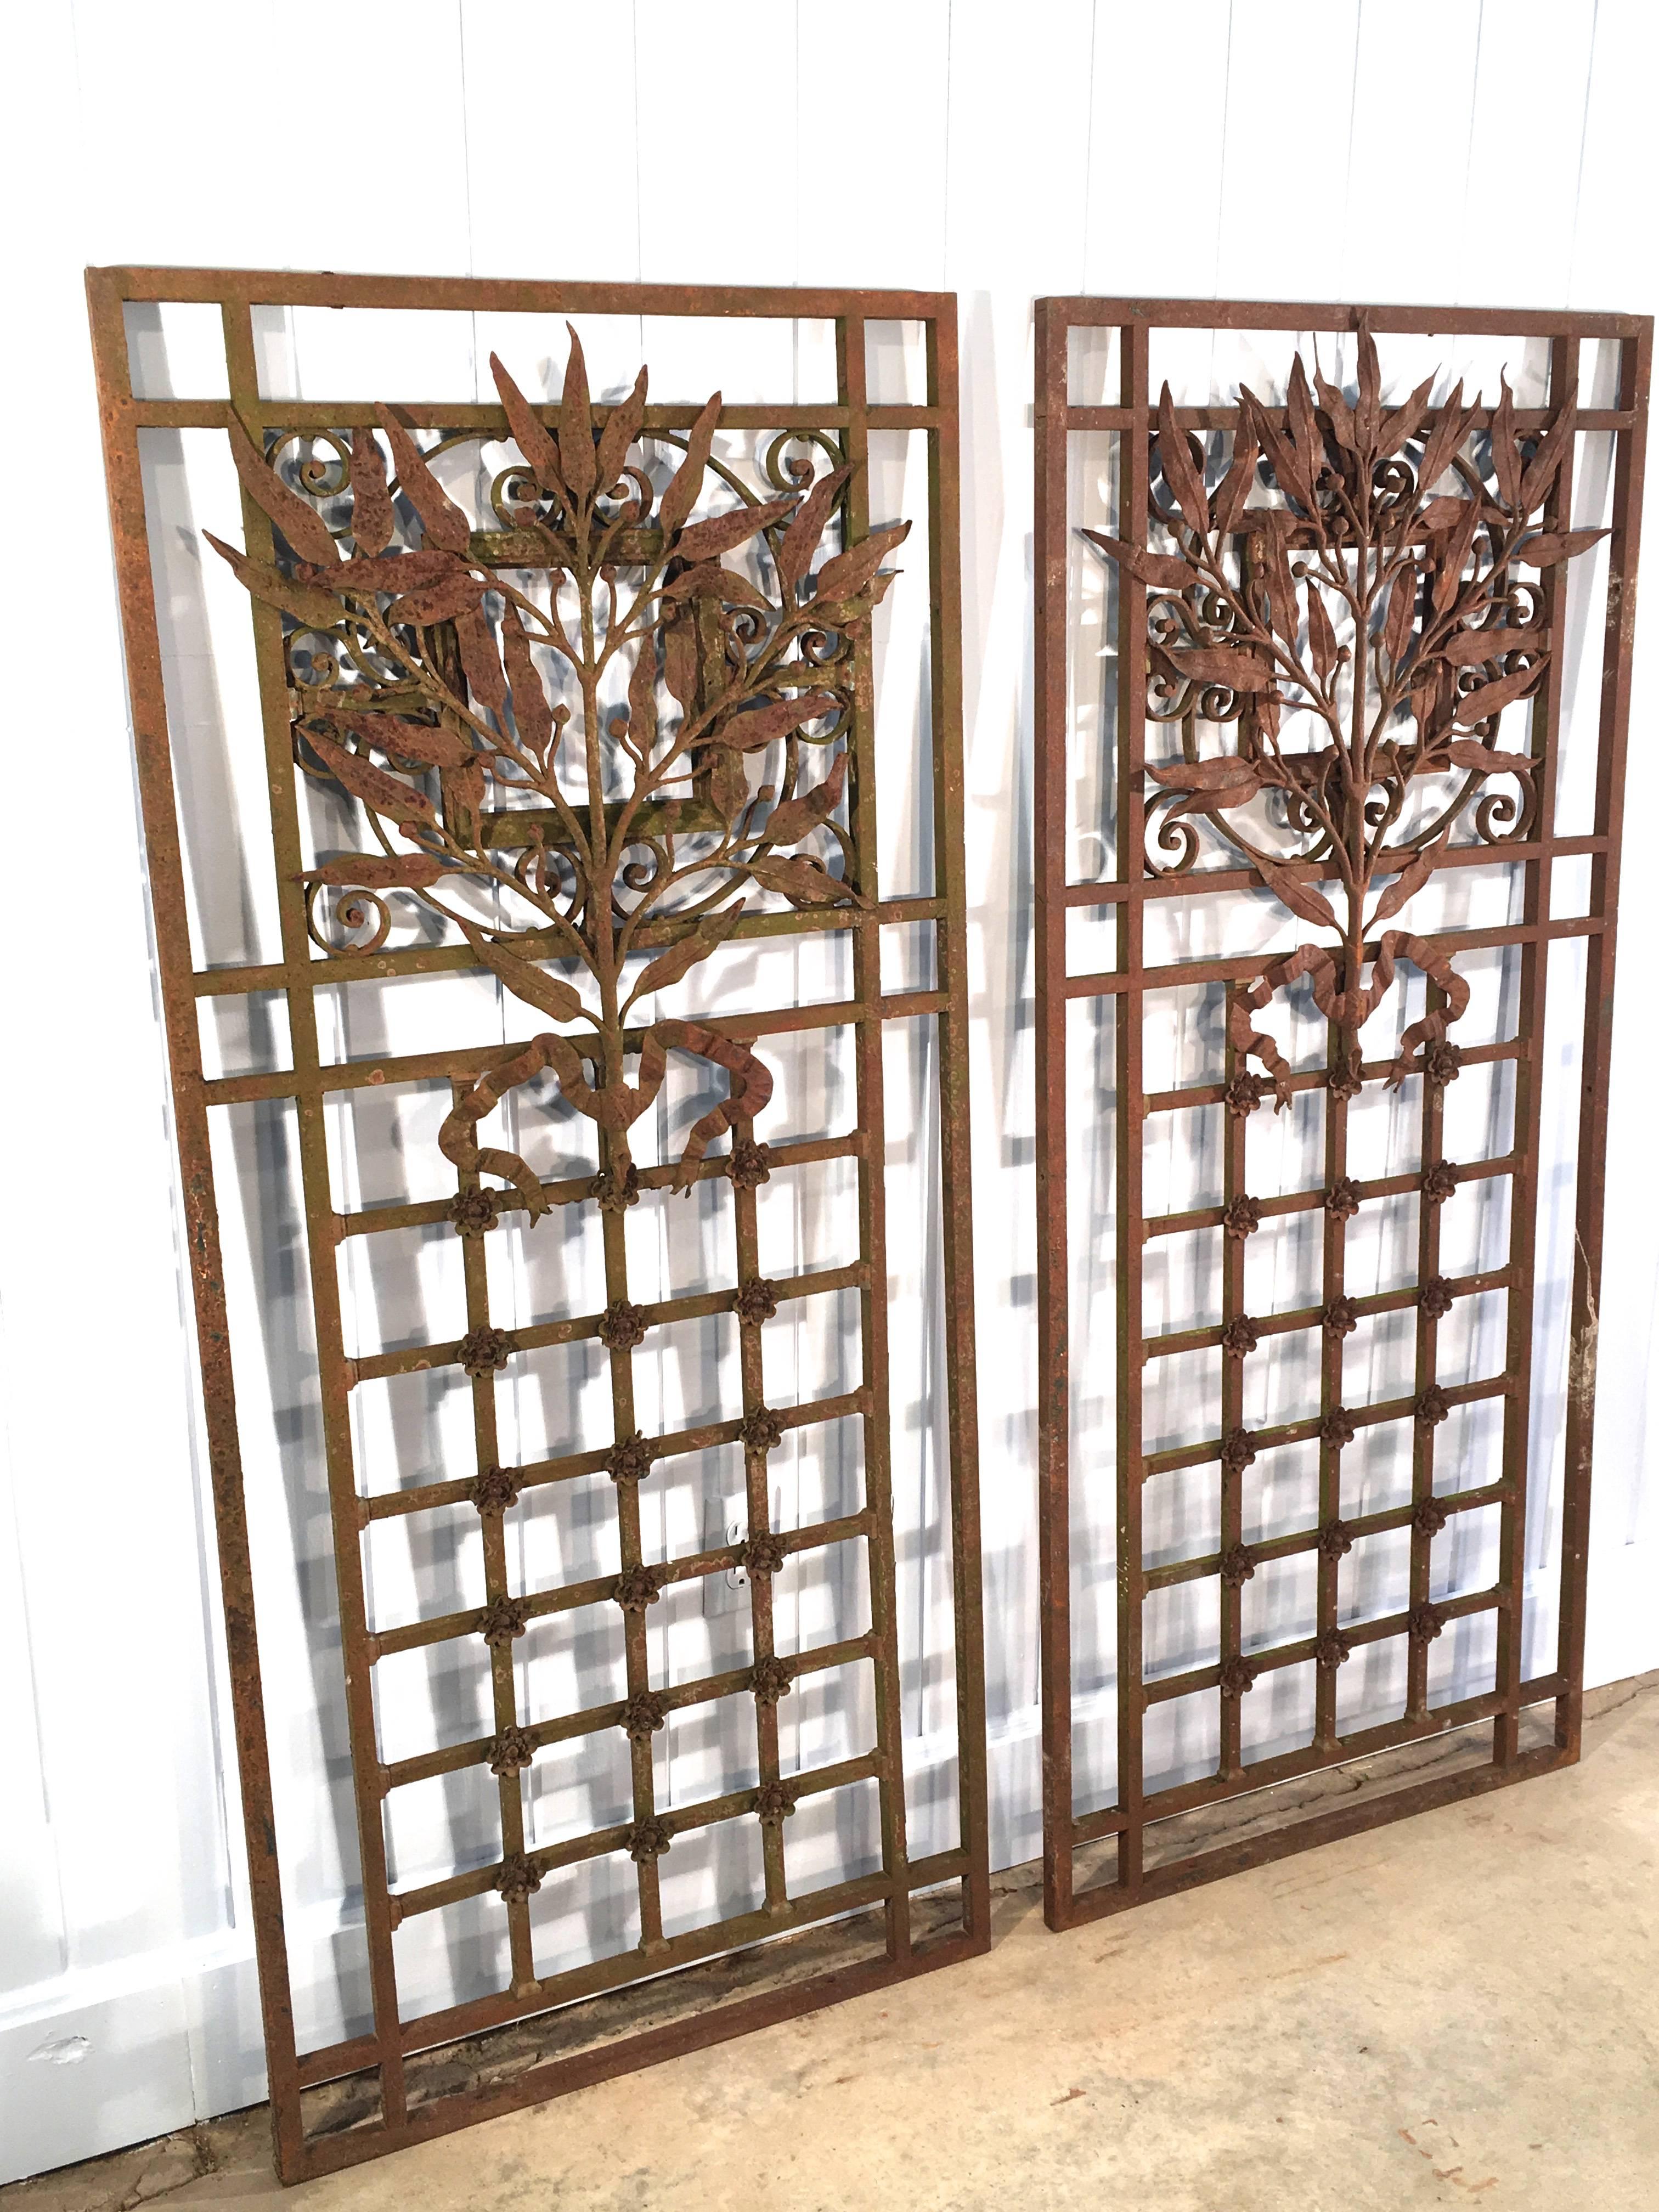 This pair of Beaux Arts grilles is extraordinary in all respects. Each features a prominent spray of hand-wrought leaves and stemmed berries fanning out from a beribboned decoration near the centre point. The bottom halves of the grilles comprise